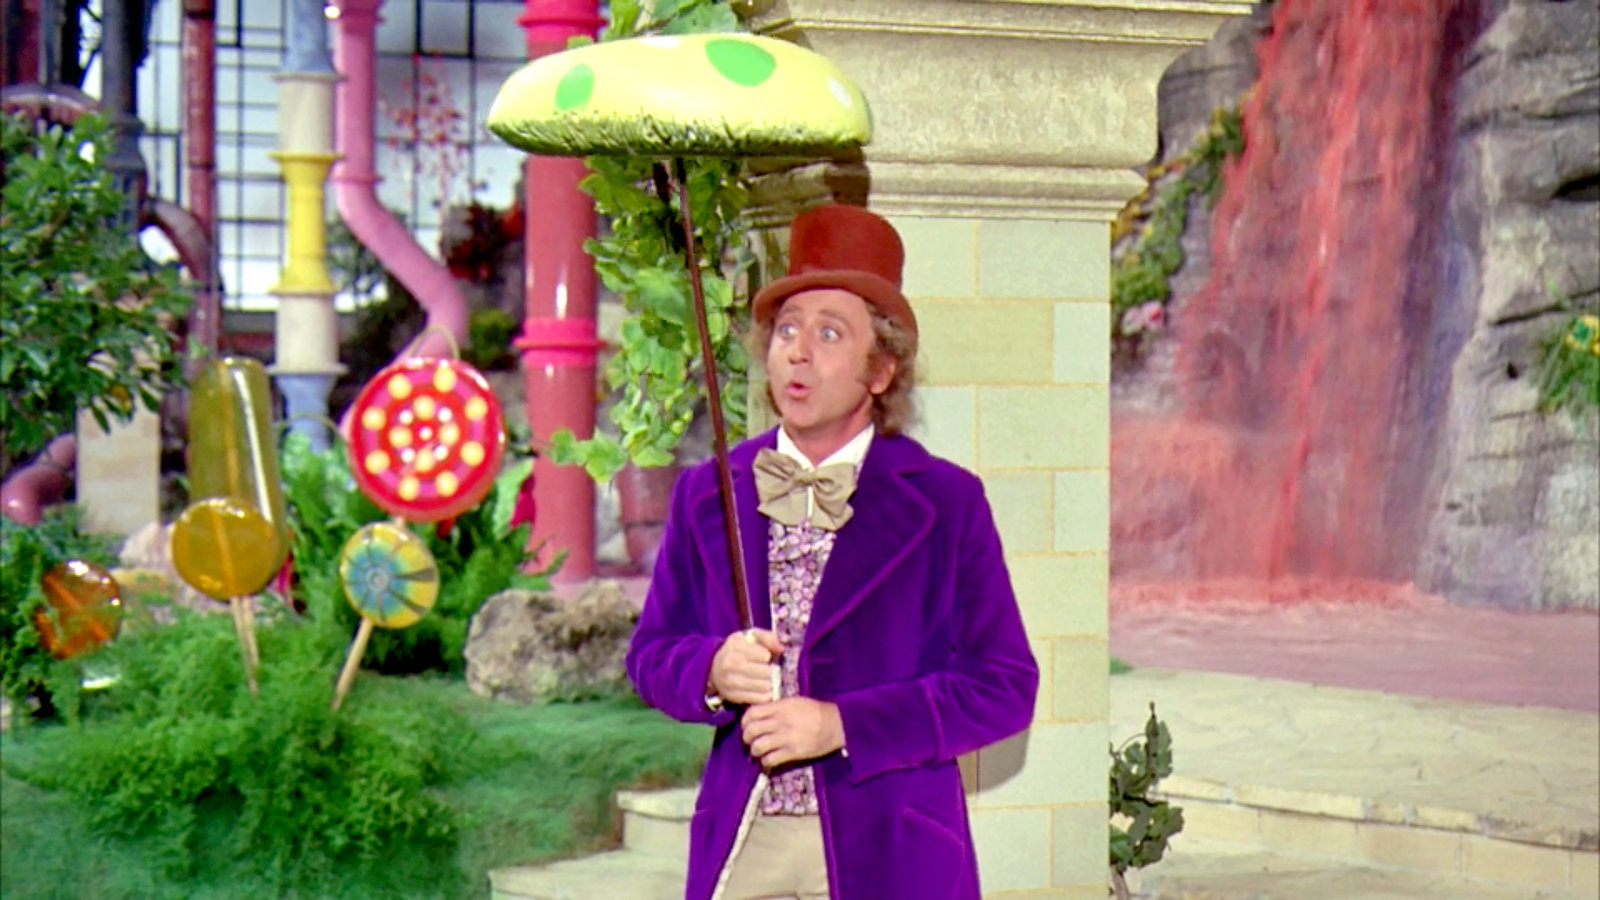 7 in 10 People Can’t Get Over 15/20 on This All-Rounded Trivia Challenge — Can You Impress Me? Willy Wonka and the Chocolate Factory